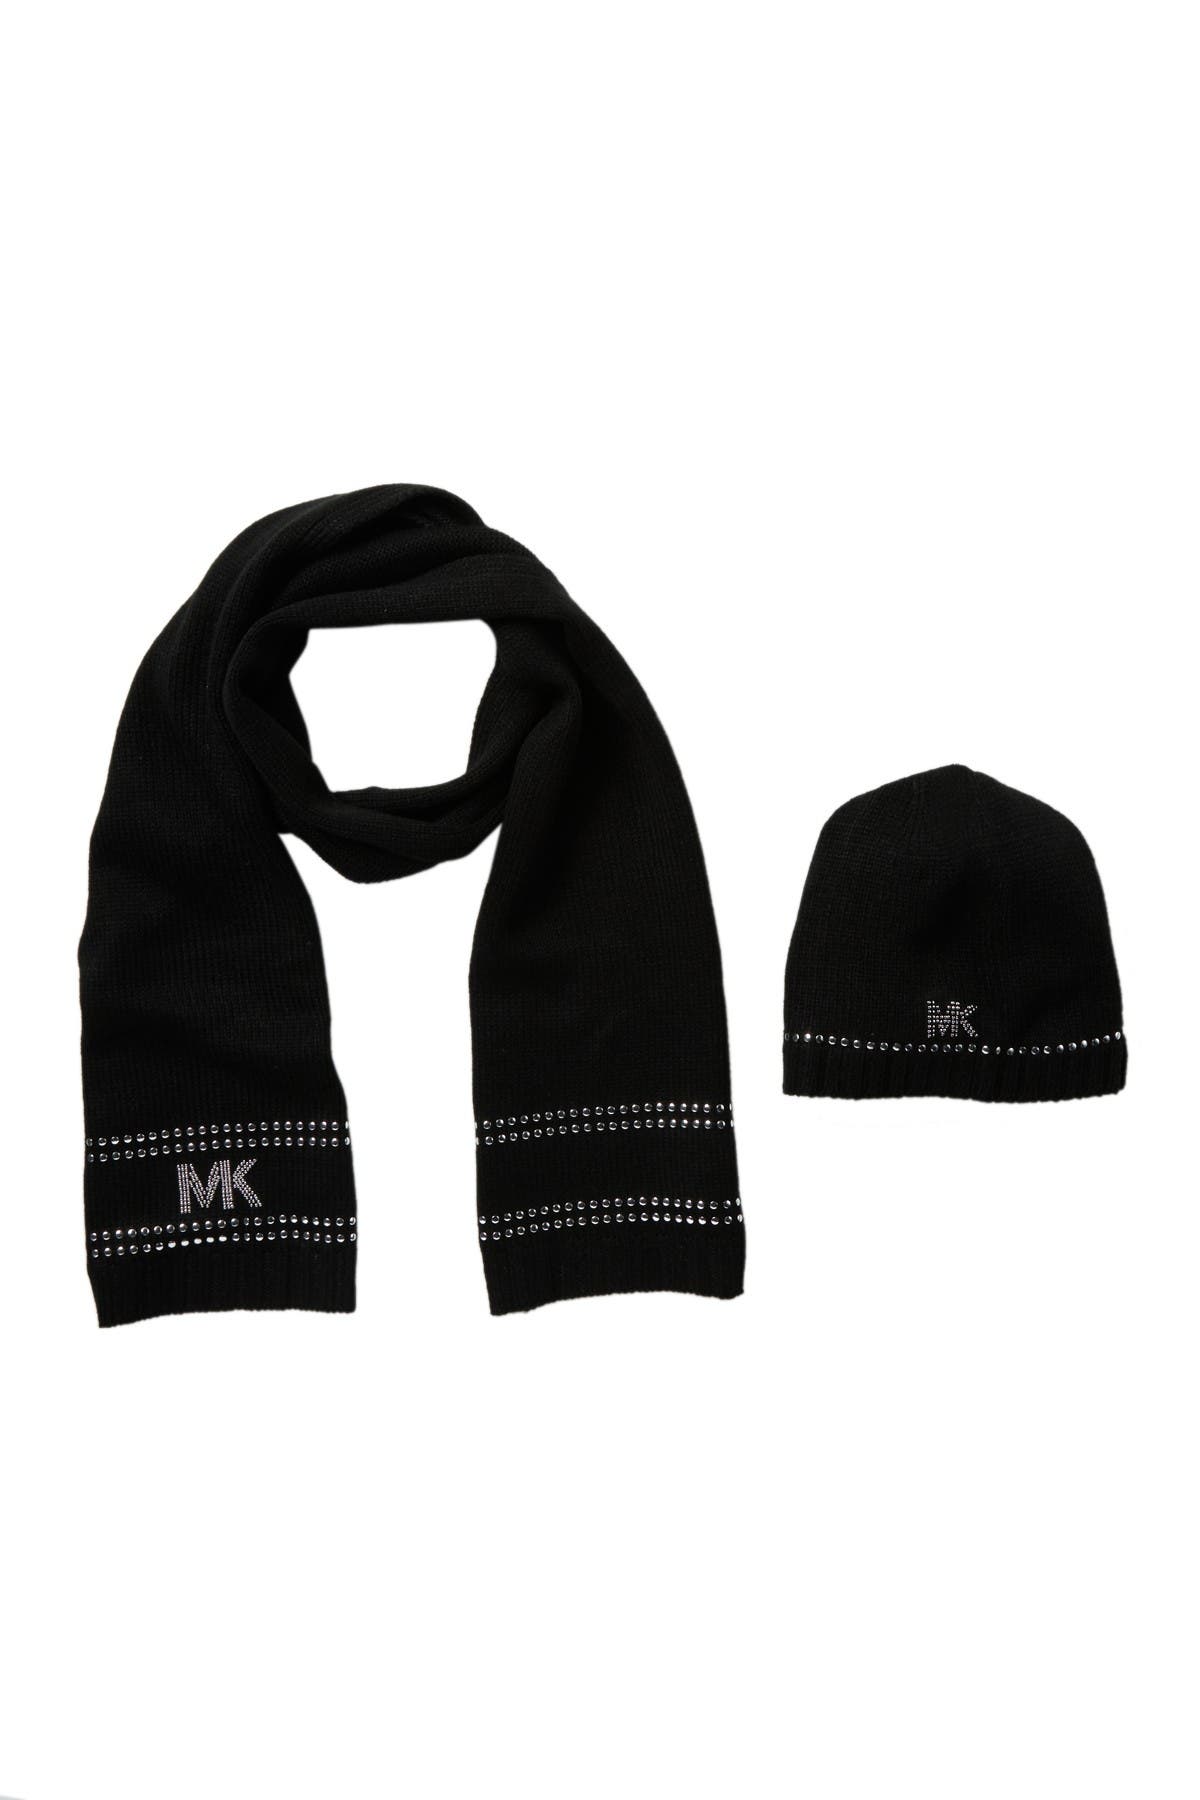 mk hats and scarves